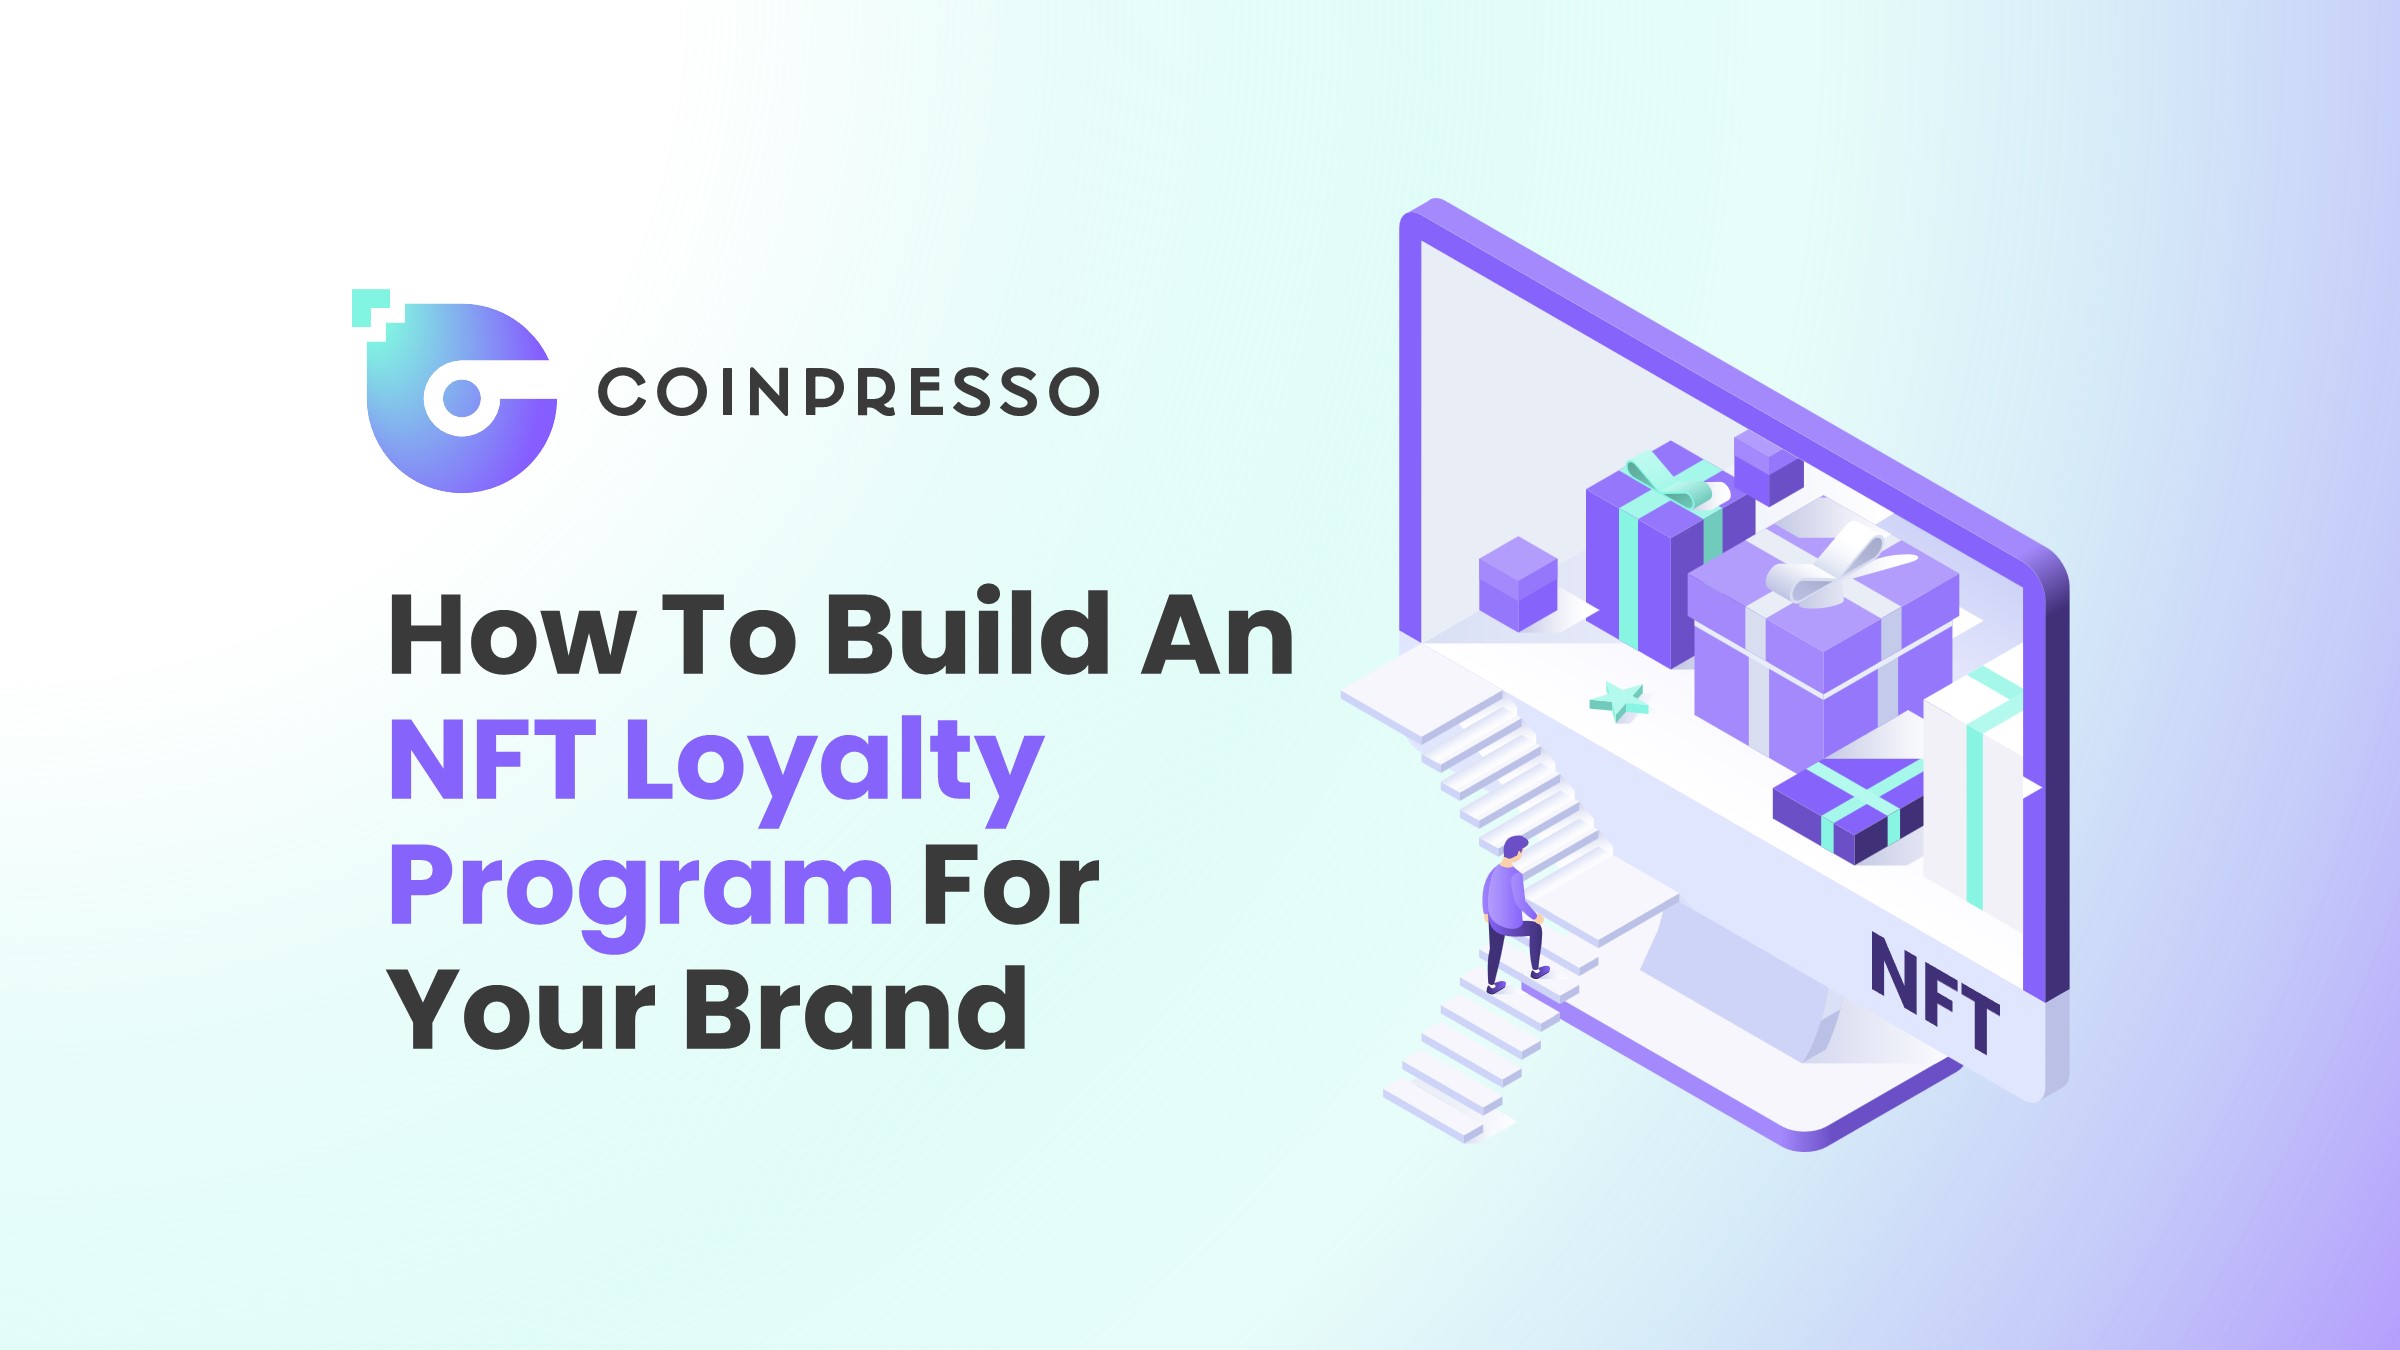 How To Build An NFT Loyalty Program For Your Brand